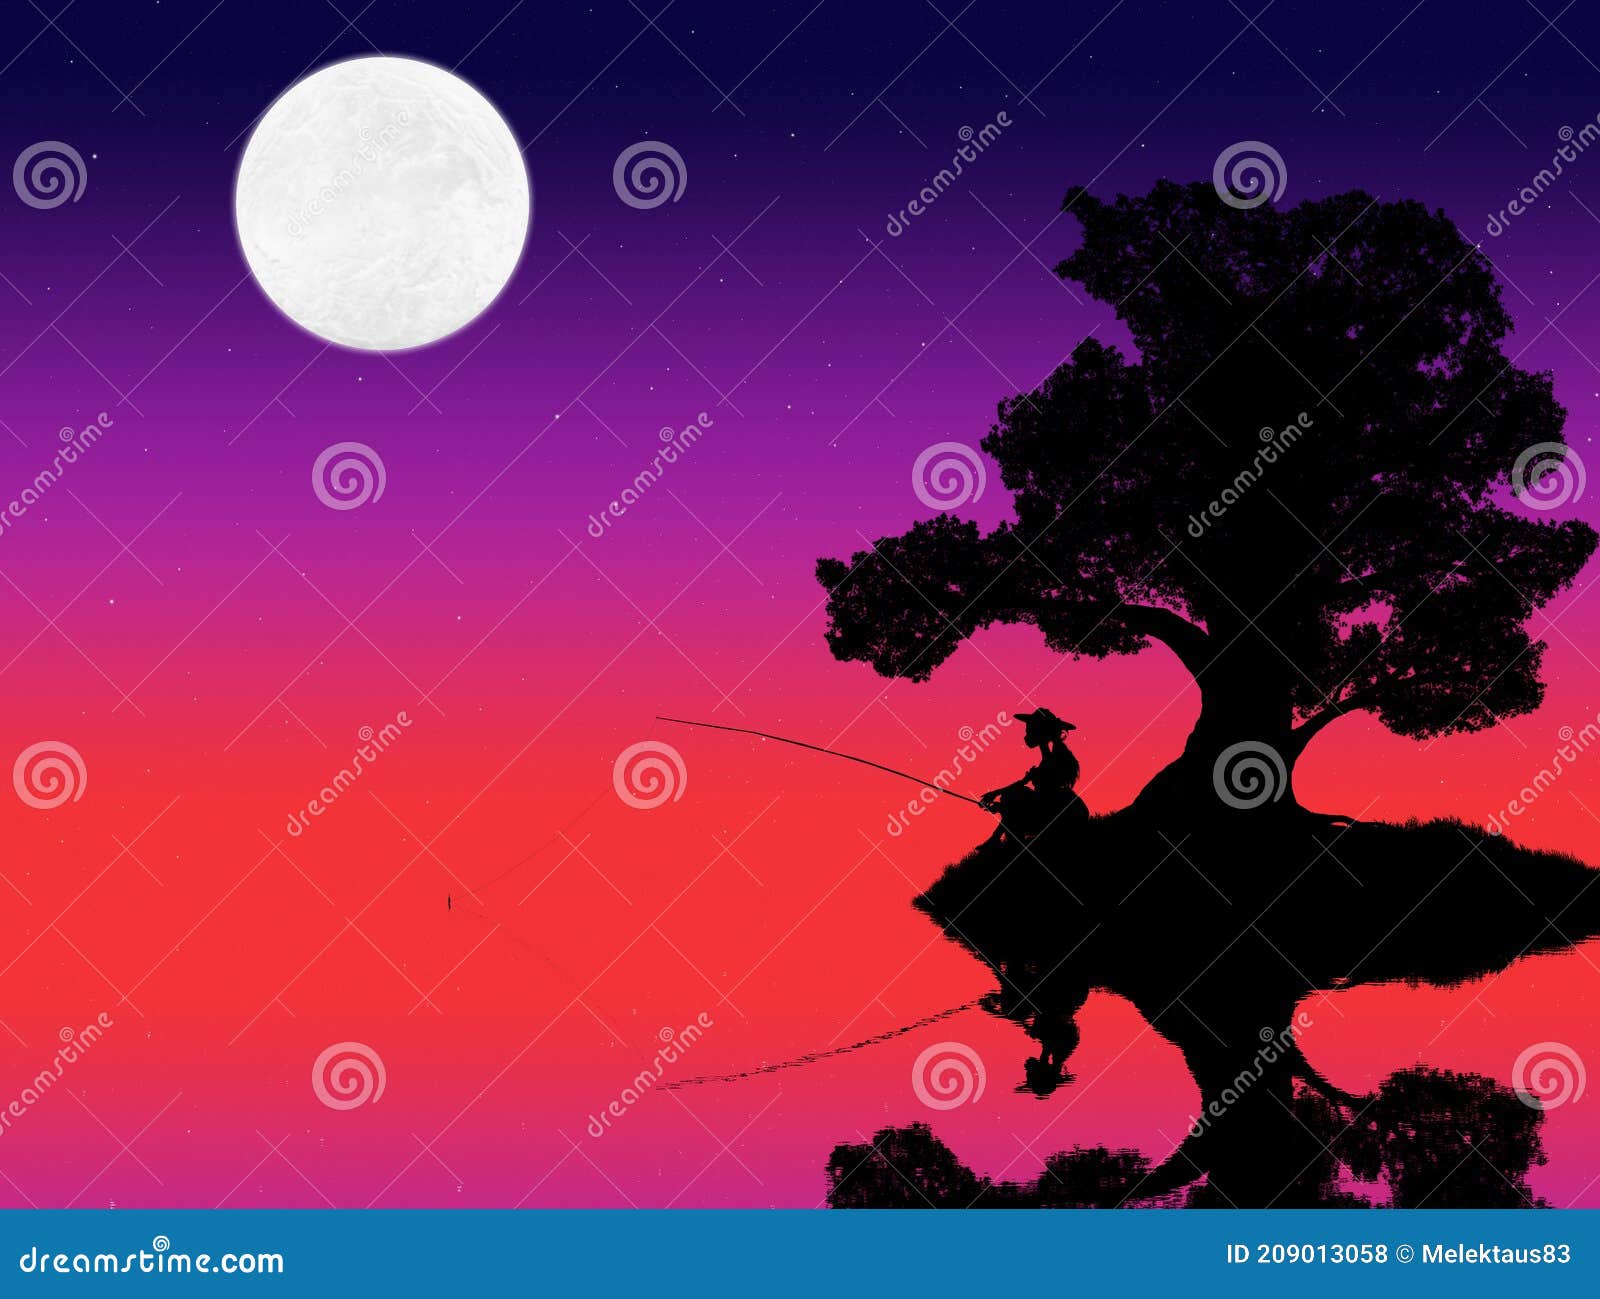 Silhouette of a Woman Sitting Under a Tree and Fishing in the Lake